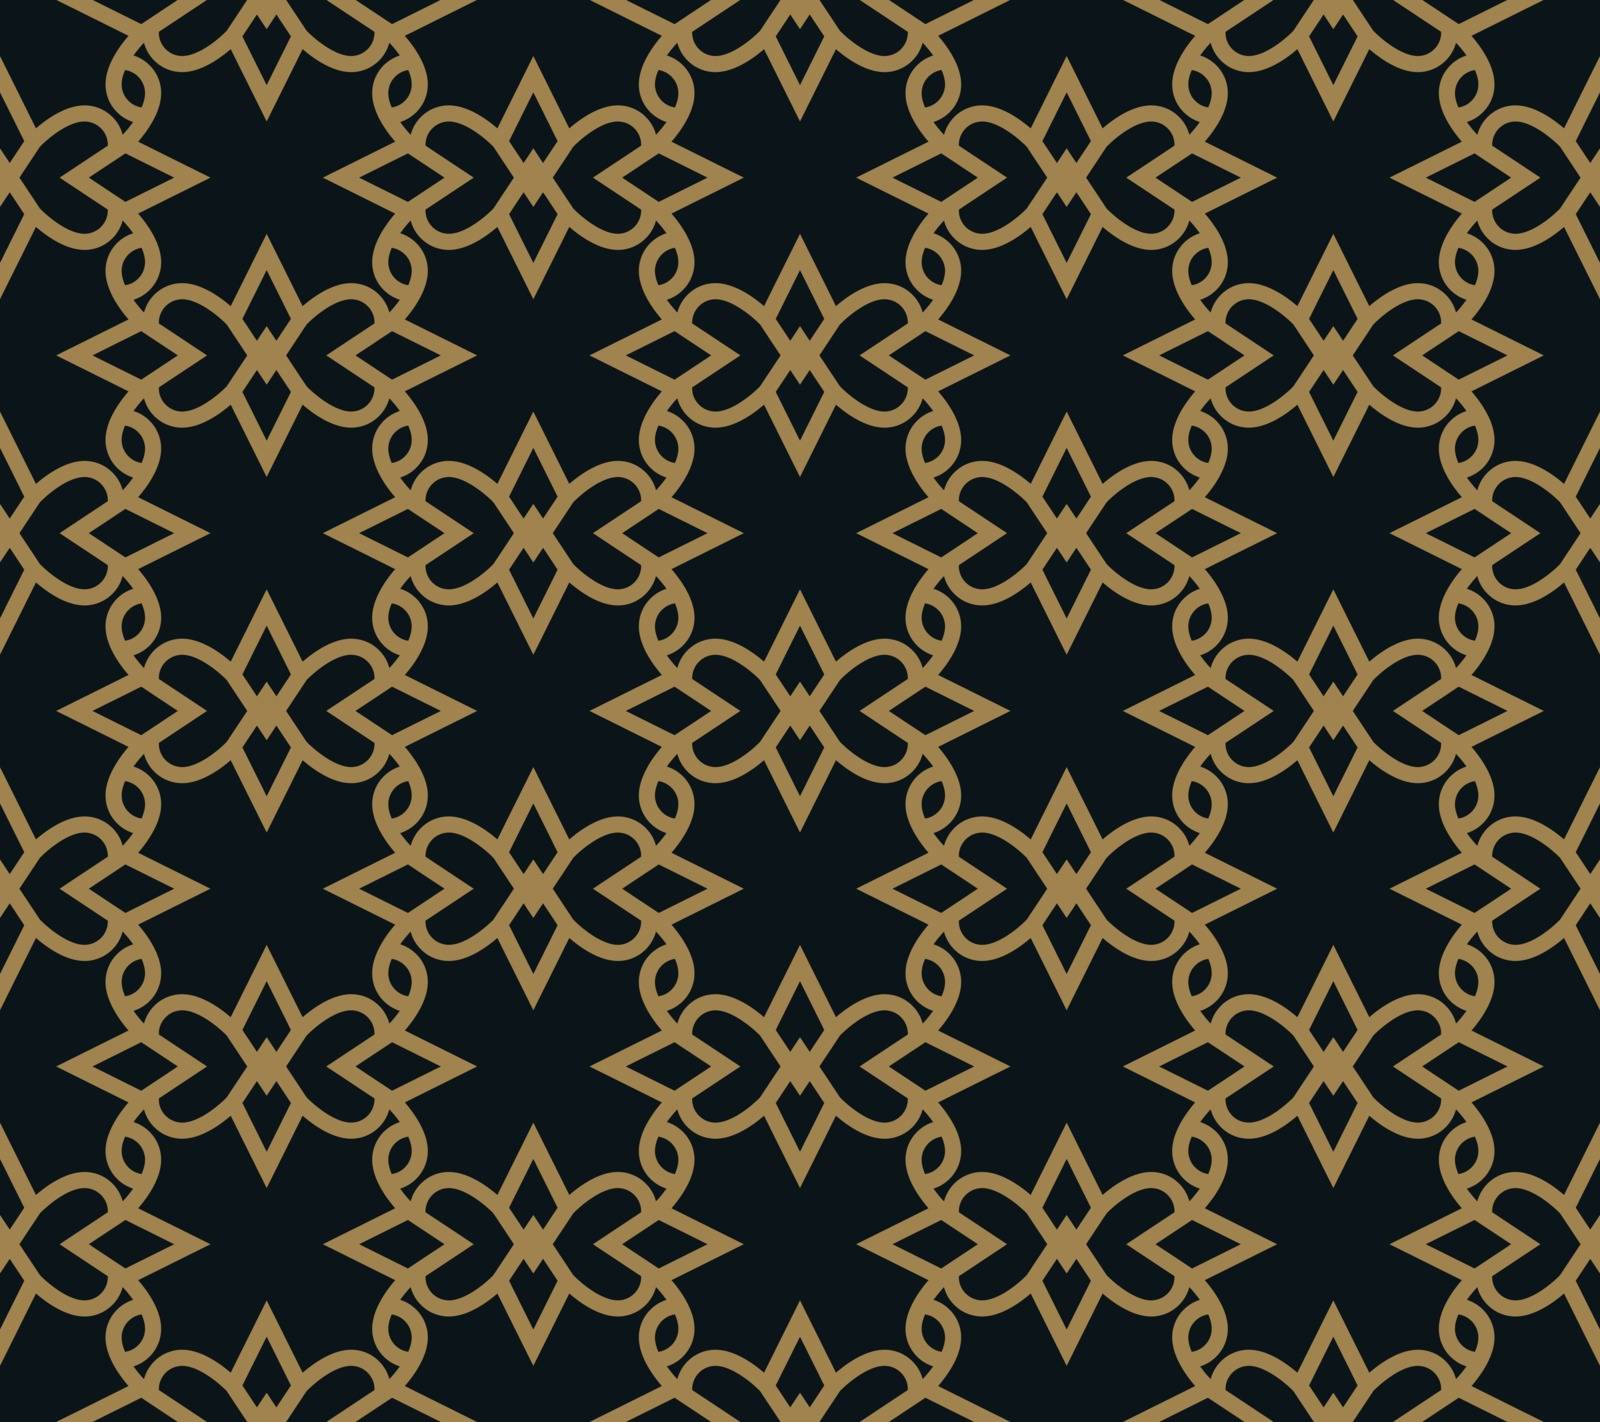 Seamless pattern of intersecting thin gold lines on black background. Abstract seamless ornament.